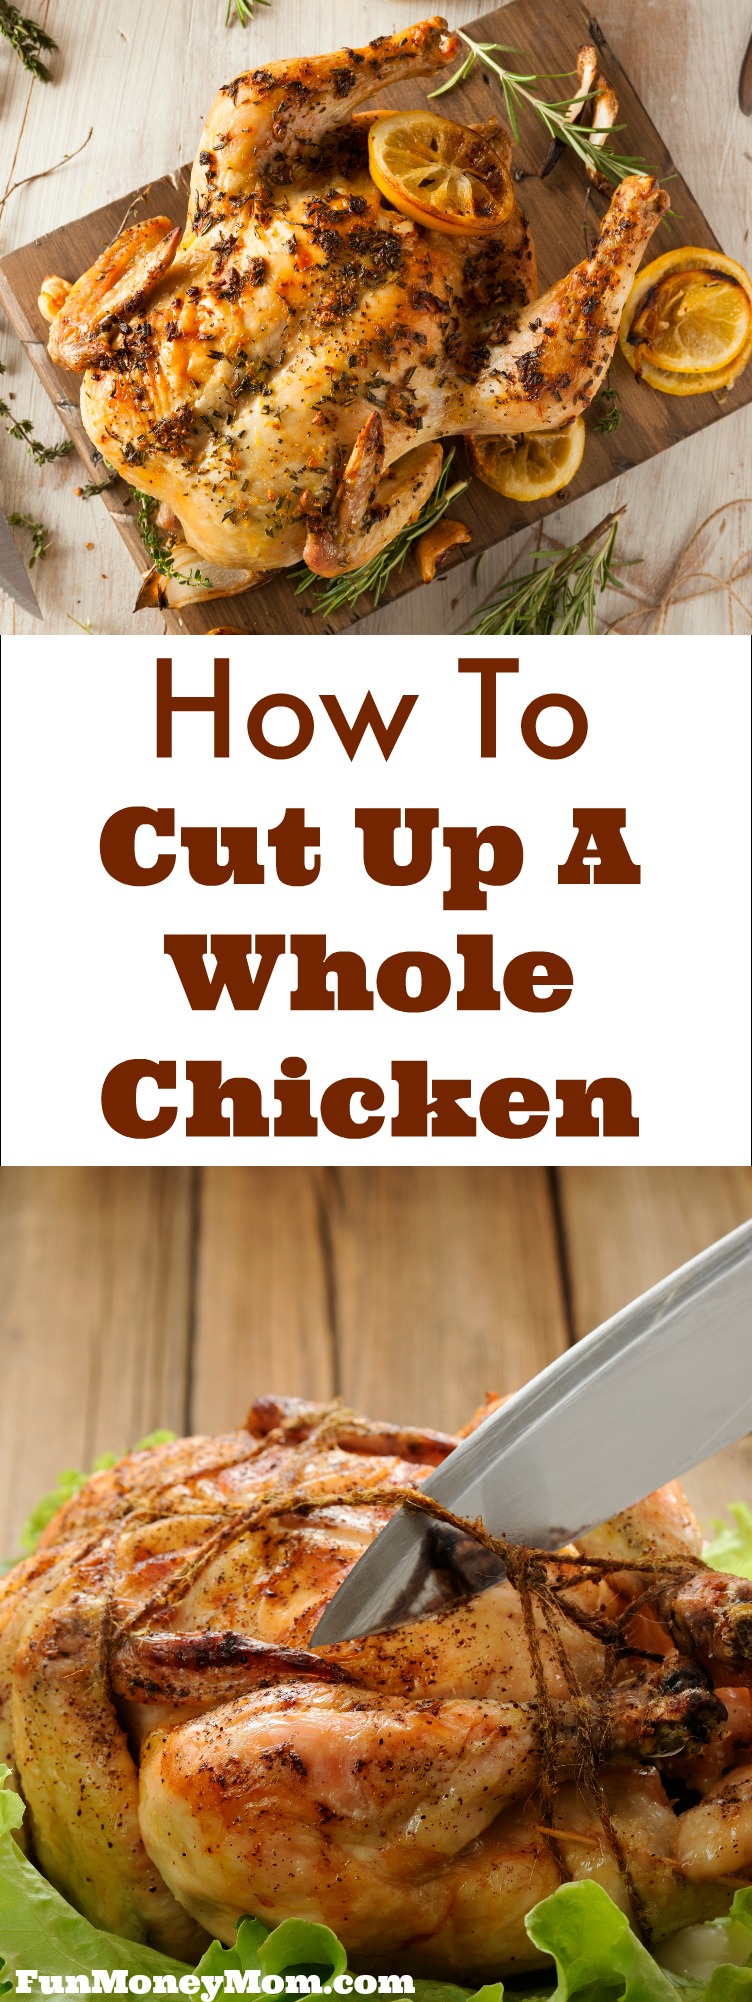 Don't know how to cut a whole chicken? Follow these step by step instructions and in no time, you'll be an expert in cutting chicken!